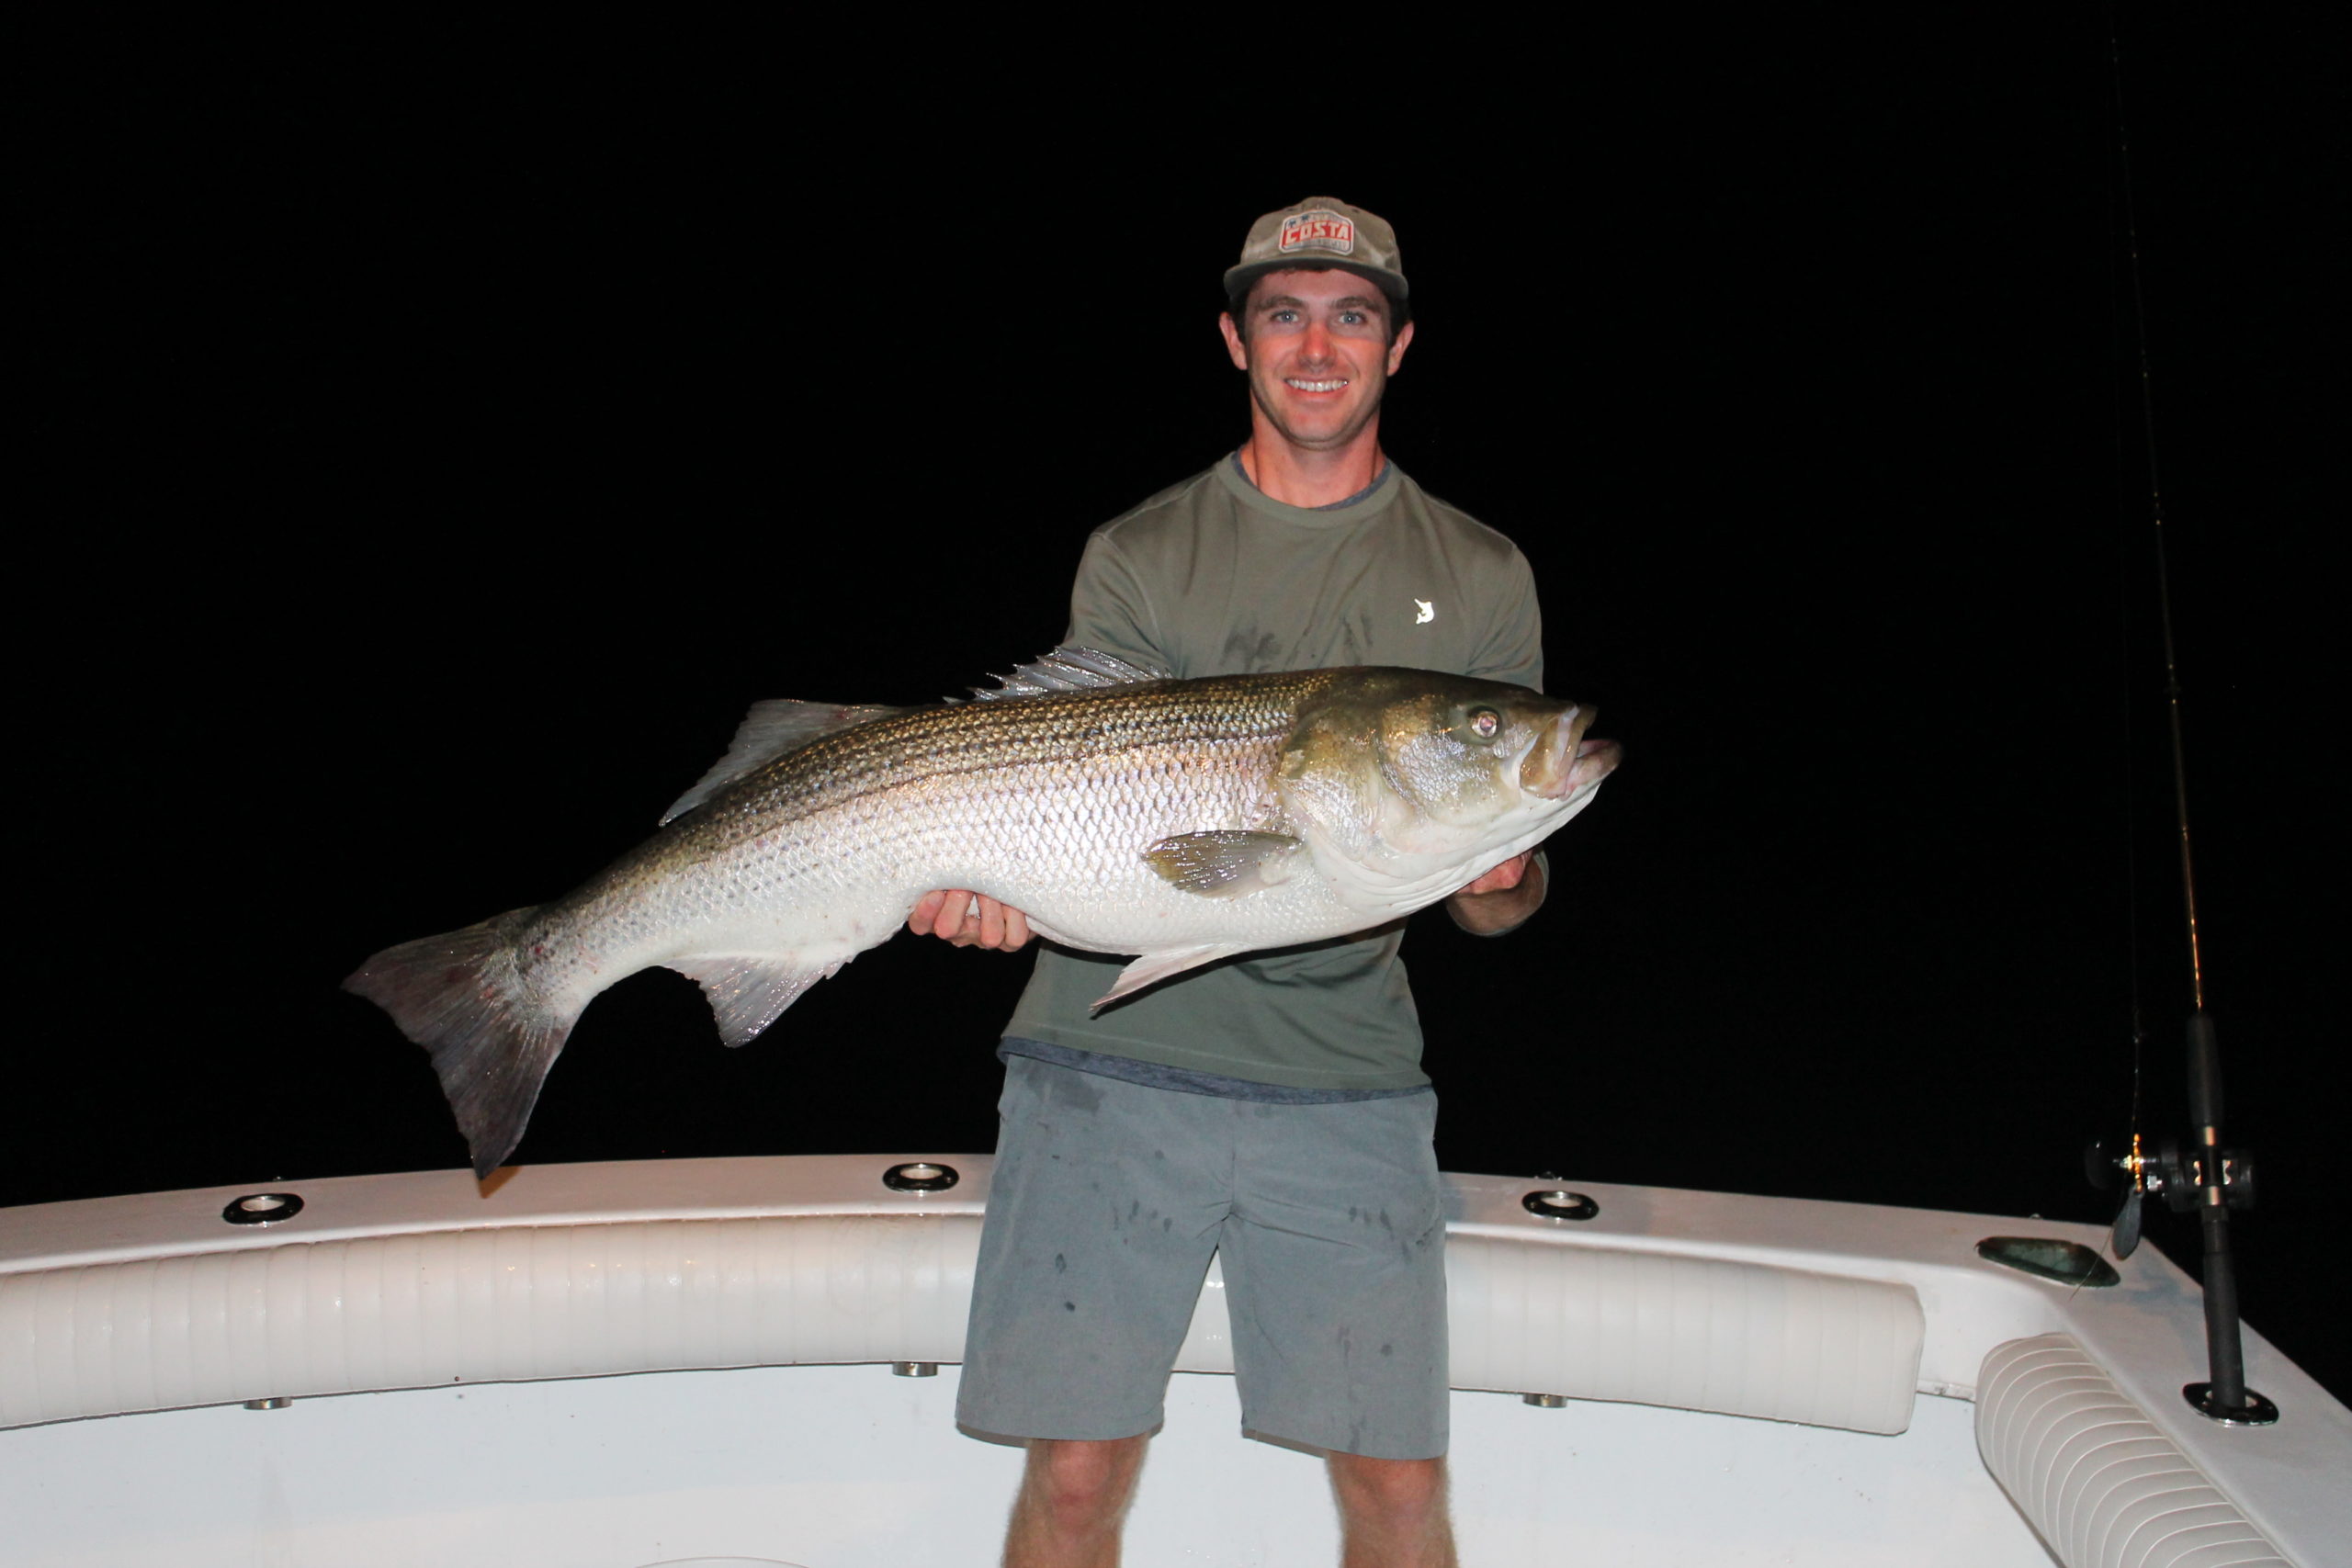 Hunter Wilcox with a big striped bass caught while fishing at night off Montauk Point with Capt. Ben McCarron of Push The Limit Sportfishing.